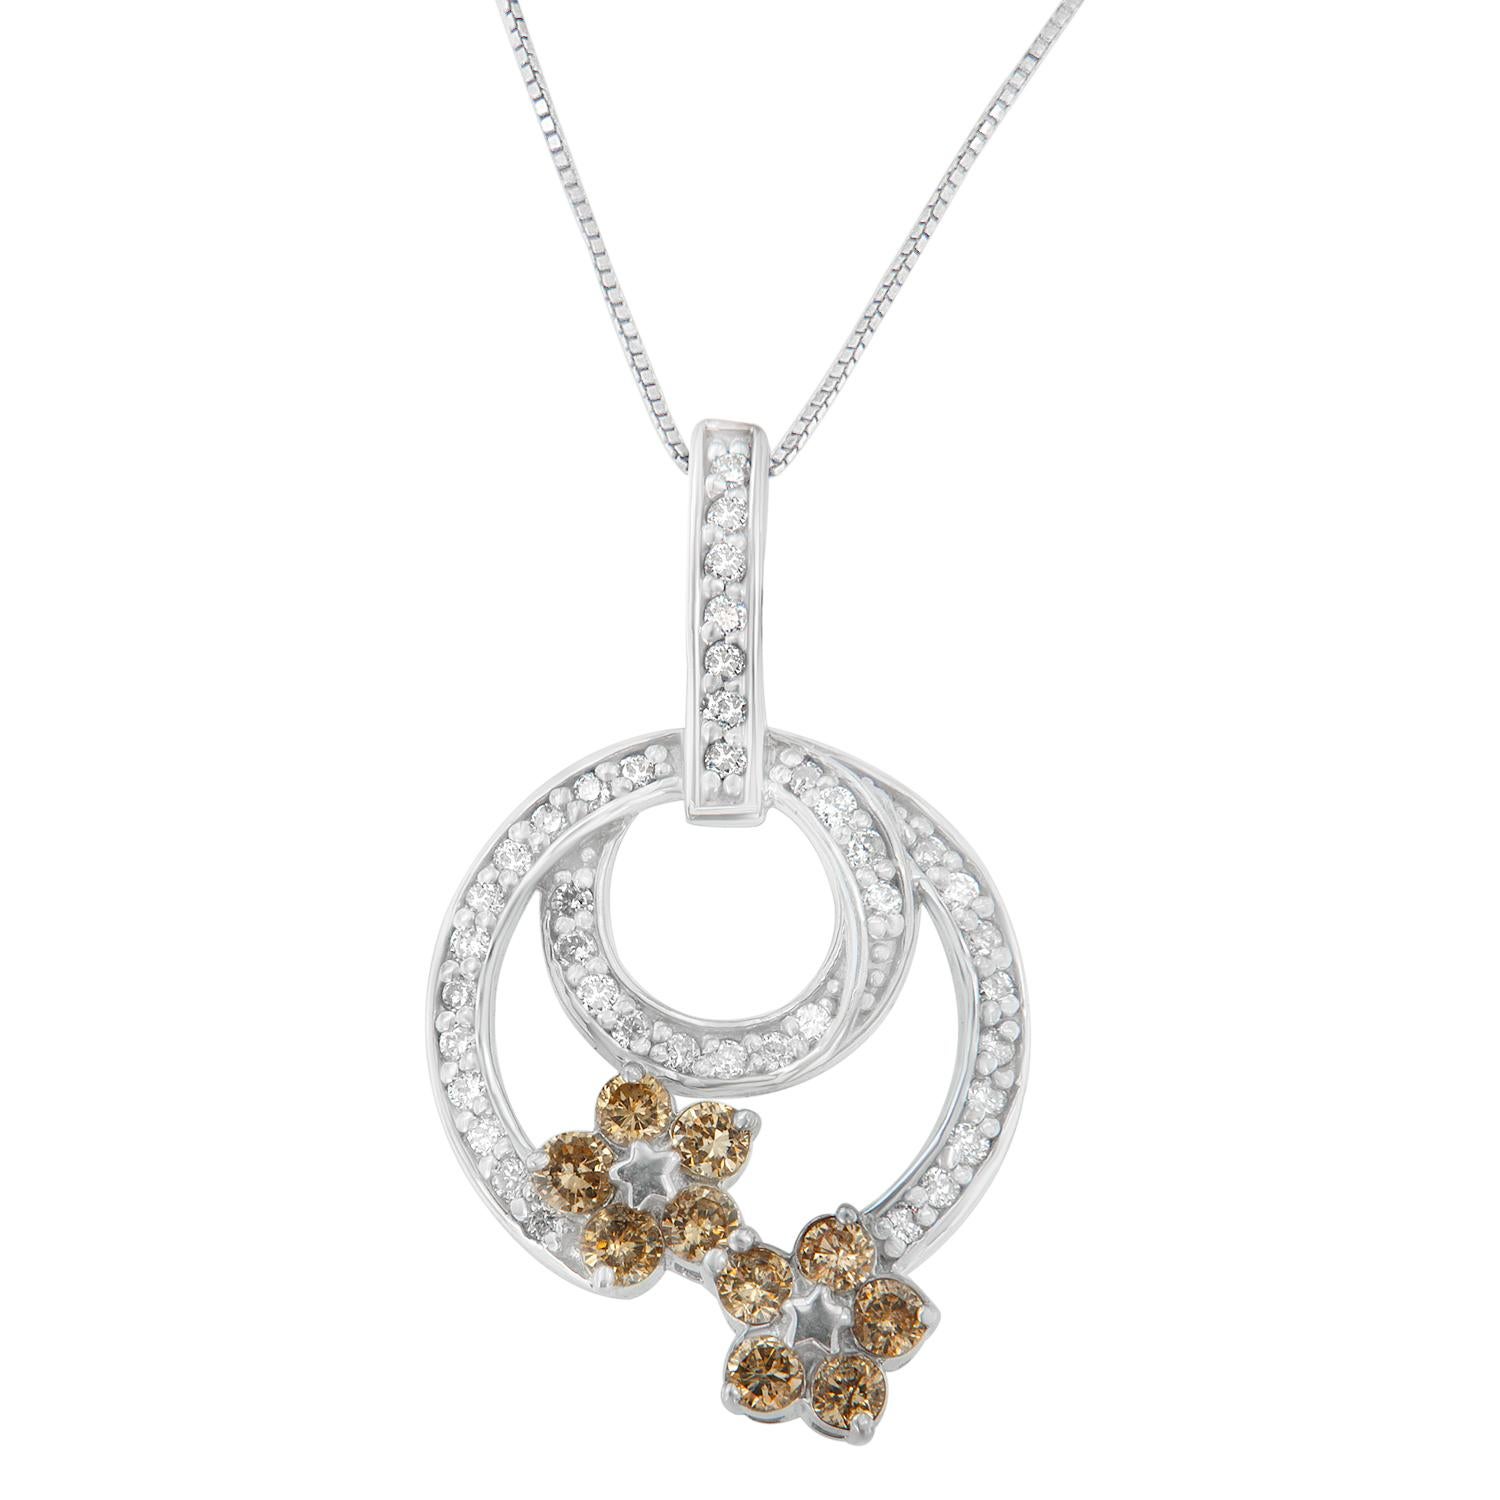  A pair of sweet and stunning Champagne-colored diamond flowers bloom together on this captivating sterling silver pendant. They're both connected to a larger circle of diamonds and accented by an inner circle of diamonds at the center, creating a